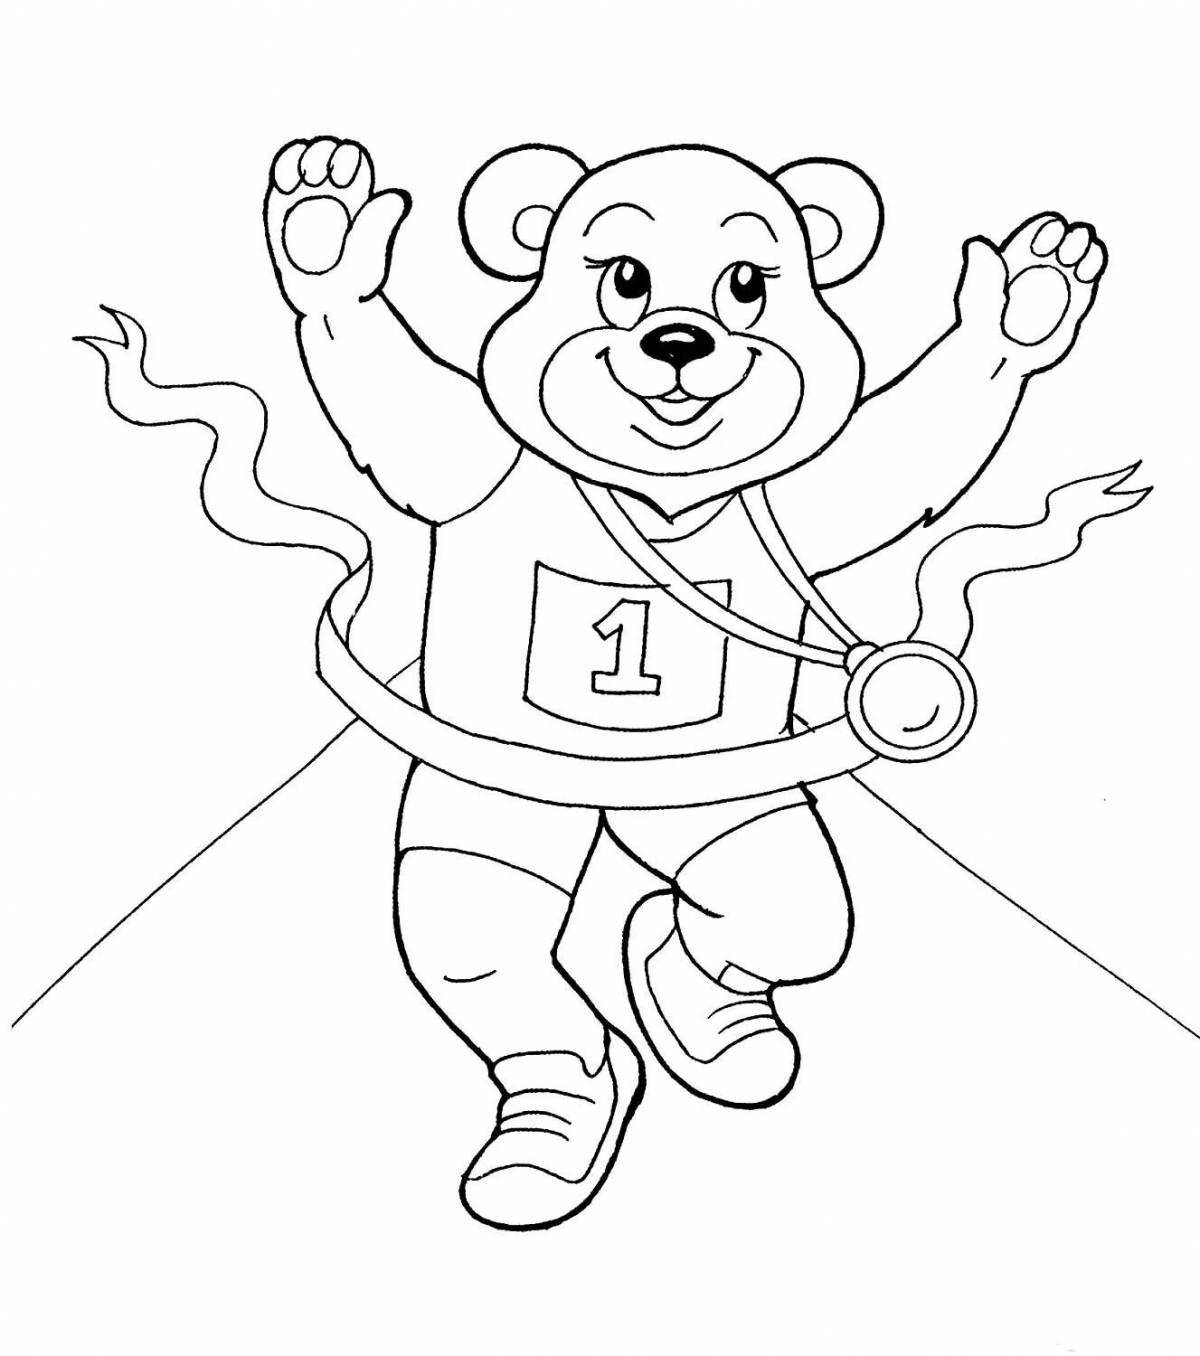 Coloring live bear on skis